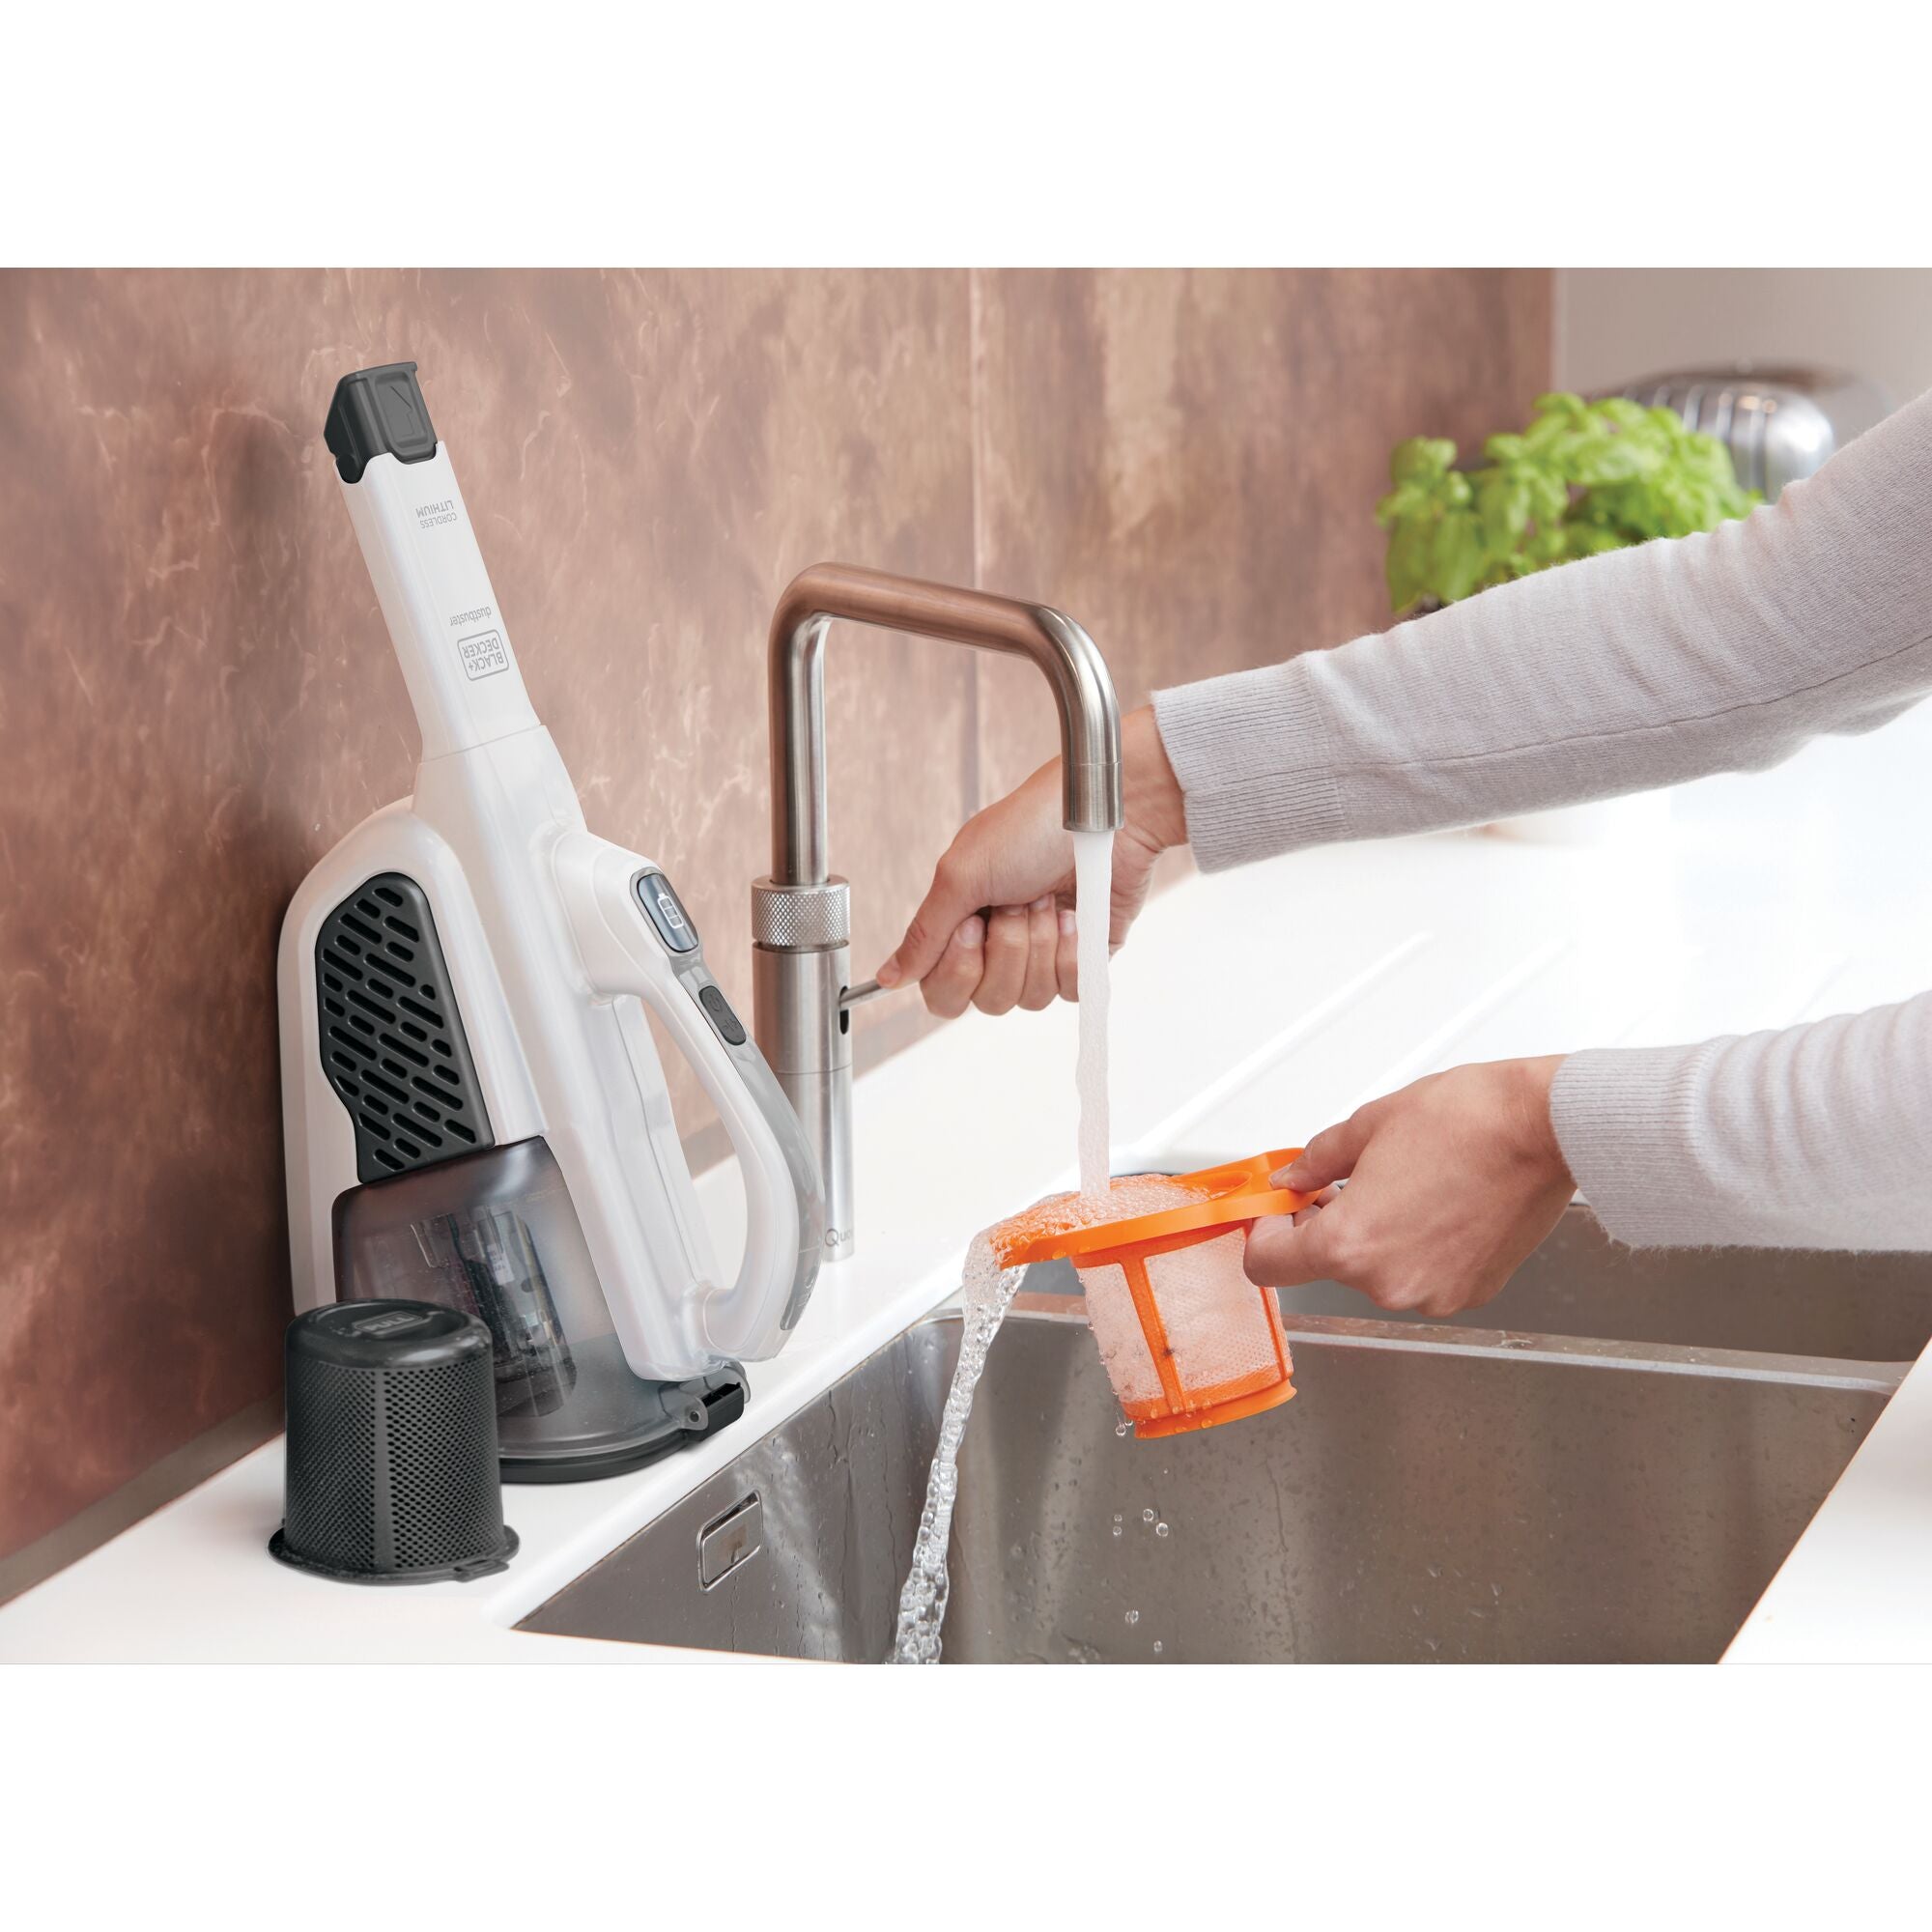 Cordless Handheld Vacuum Cleaner Filter For Black Decker Cleaning